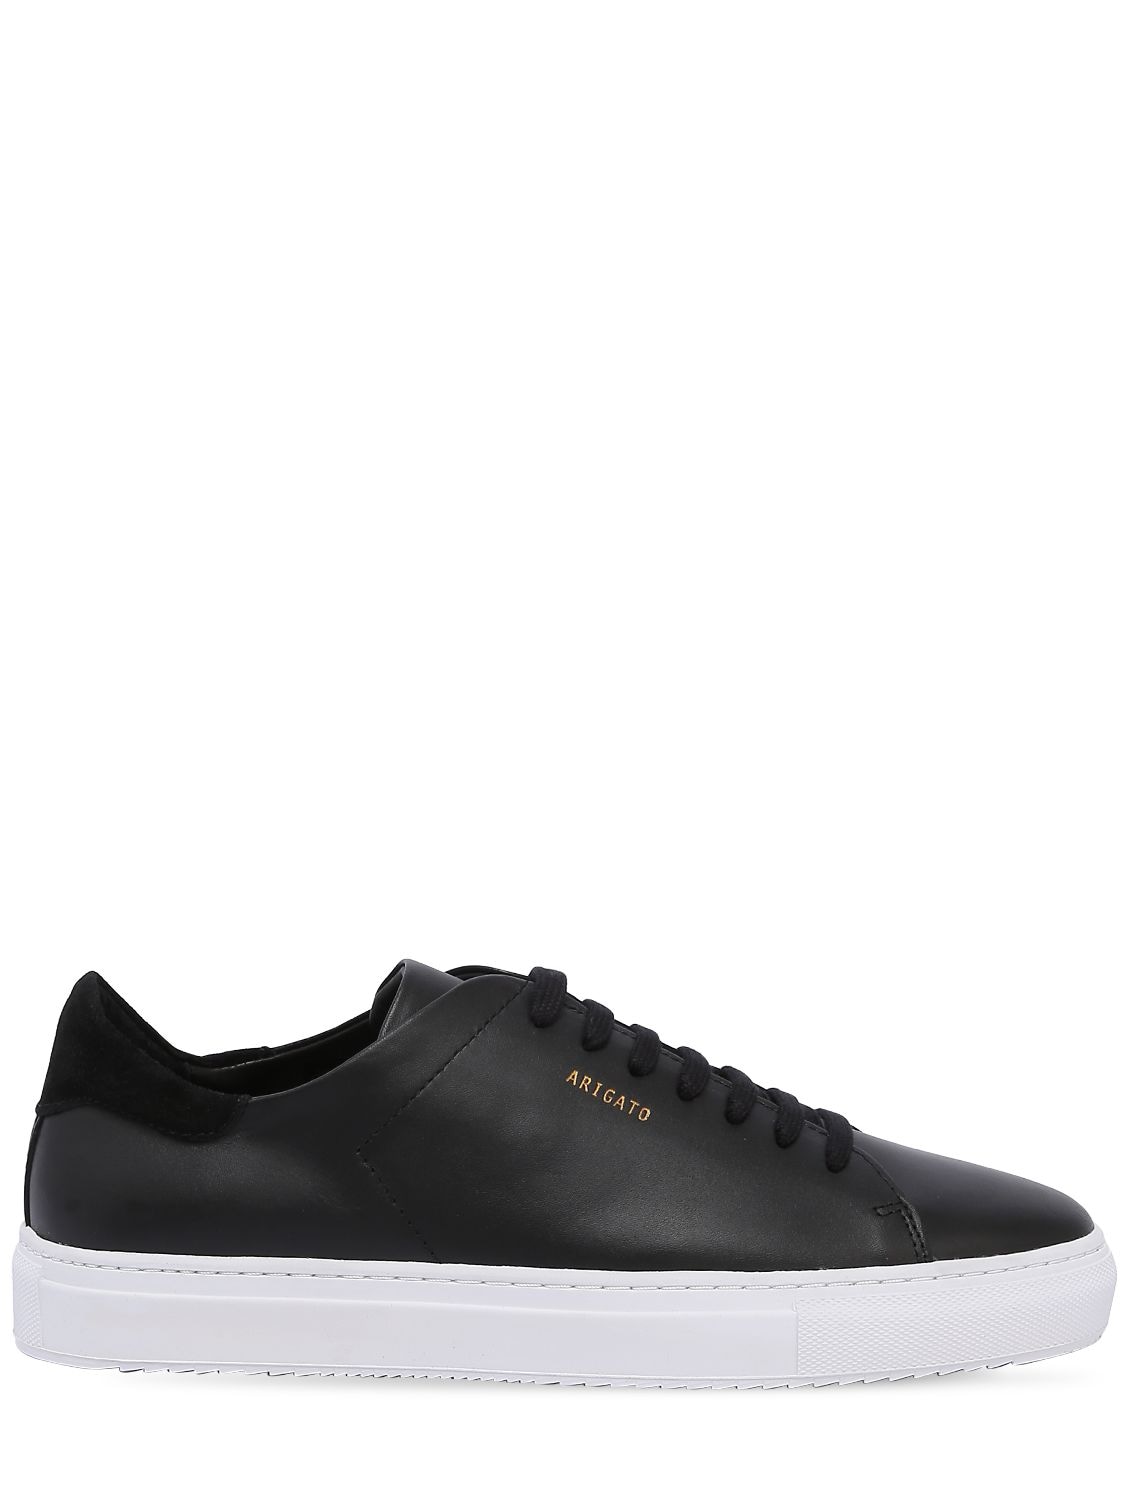 Axel Arigato Clean 90 Brushed Leather Sneakers In Black